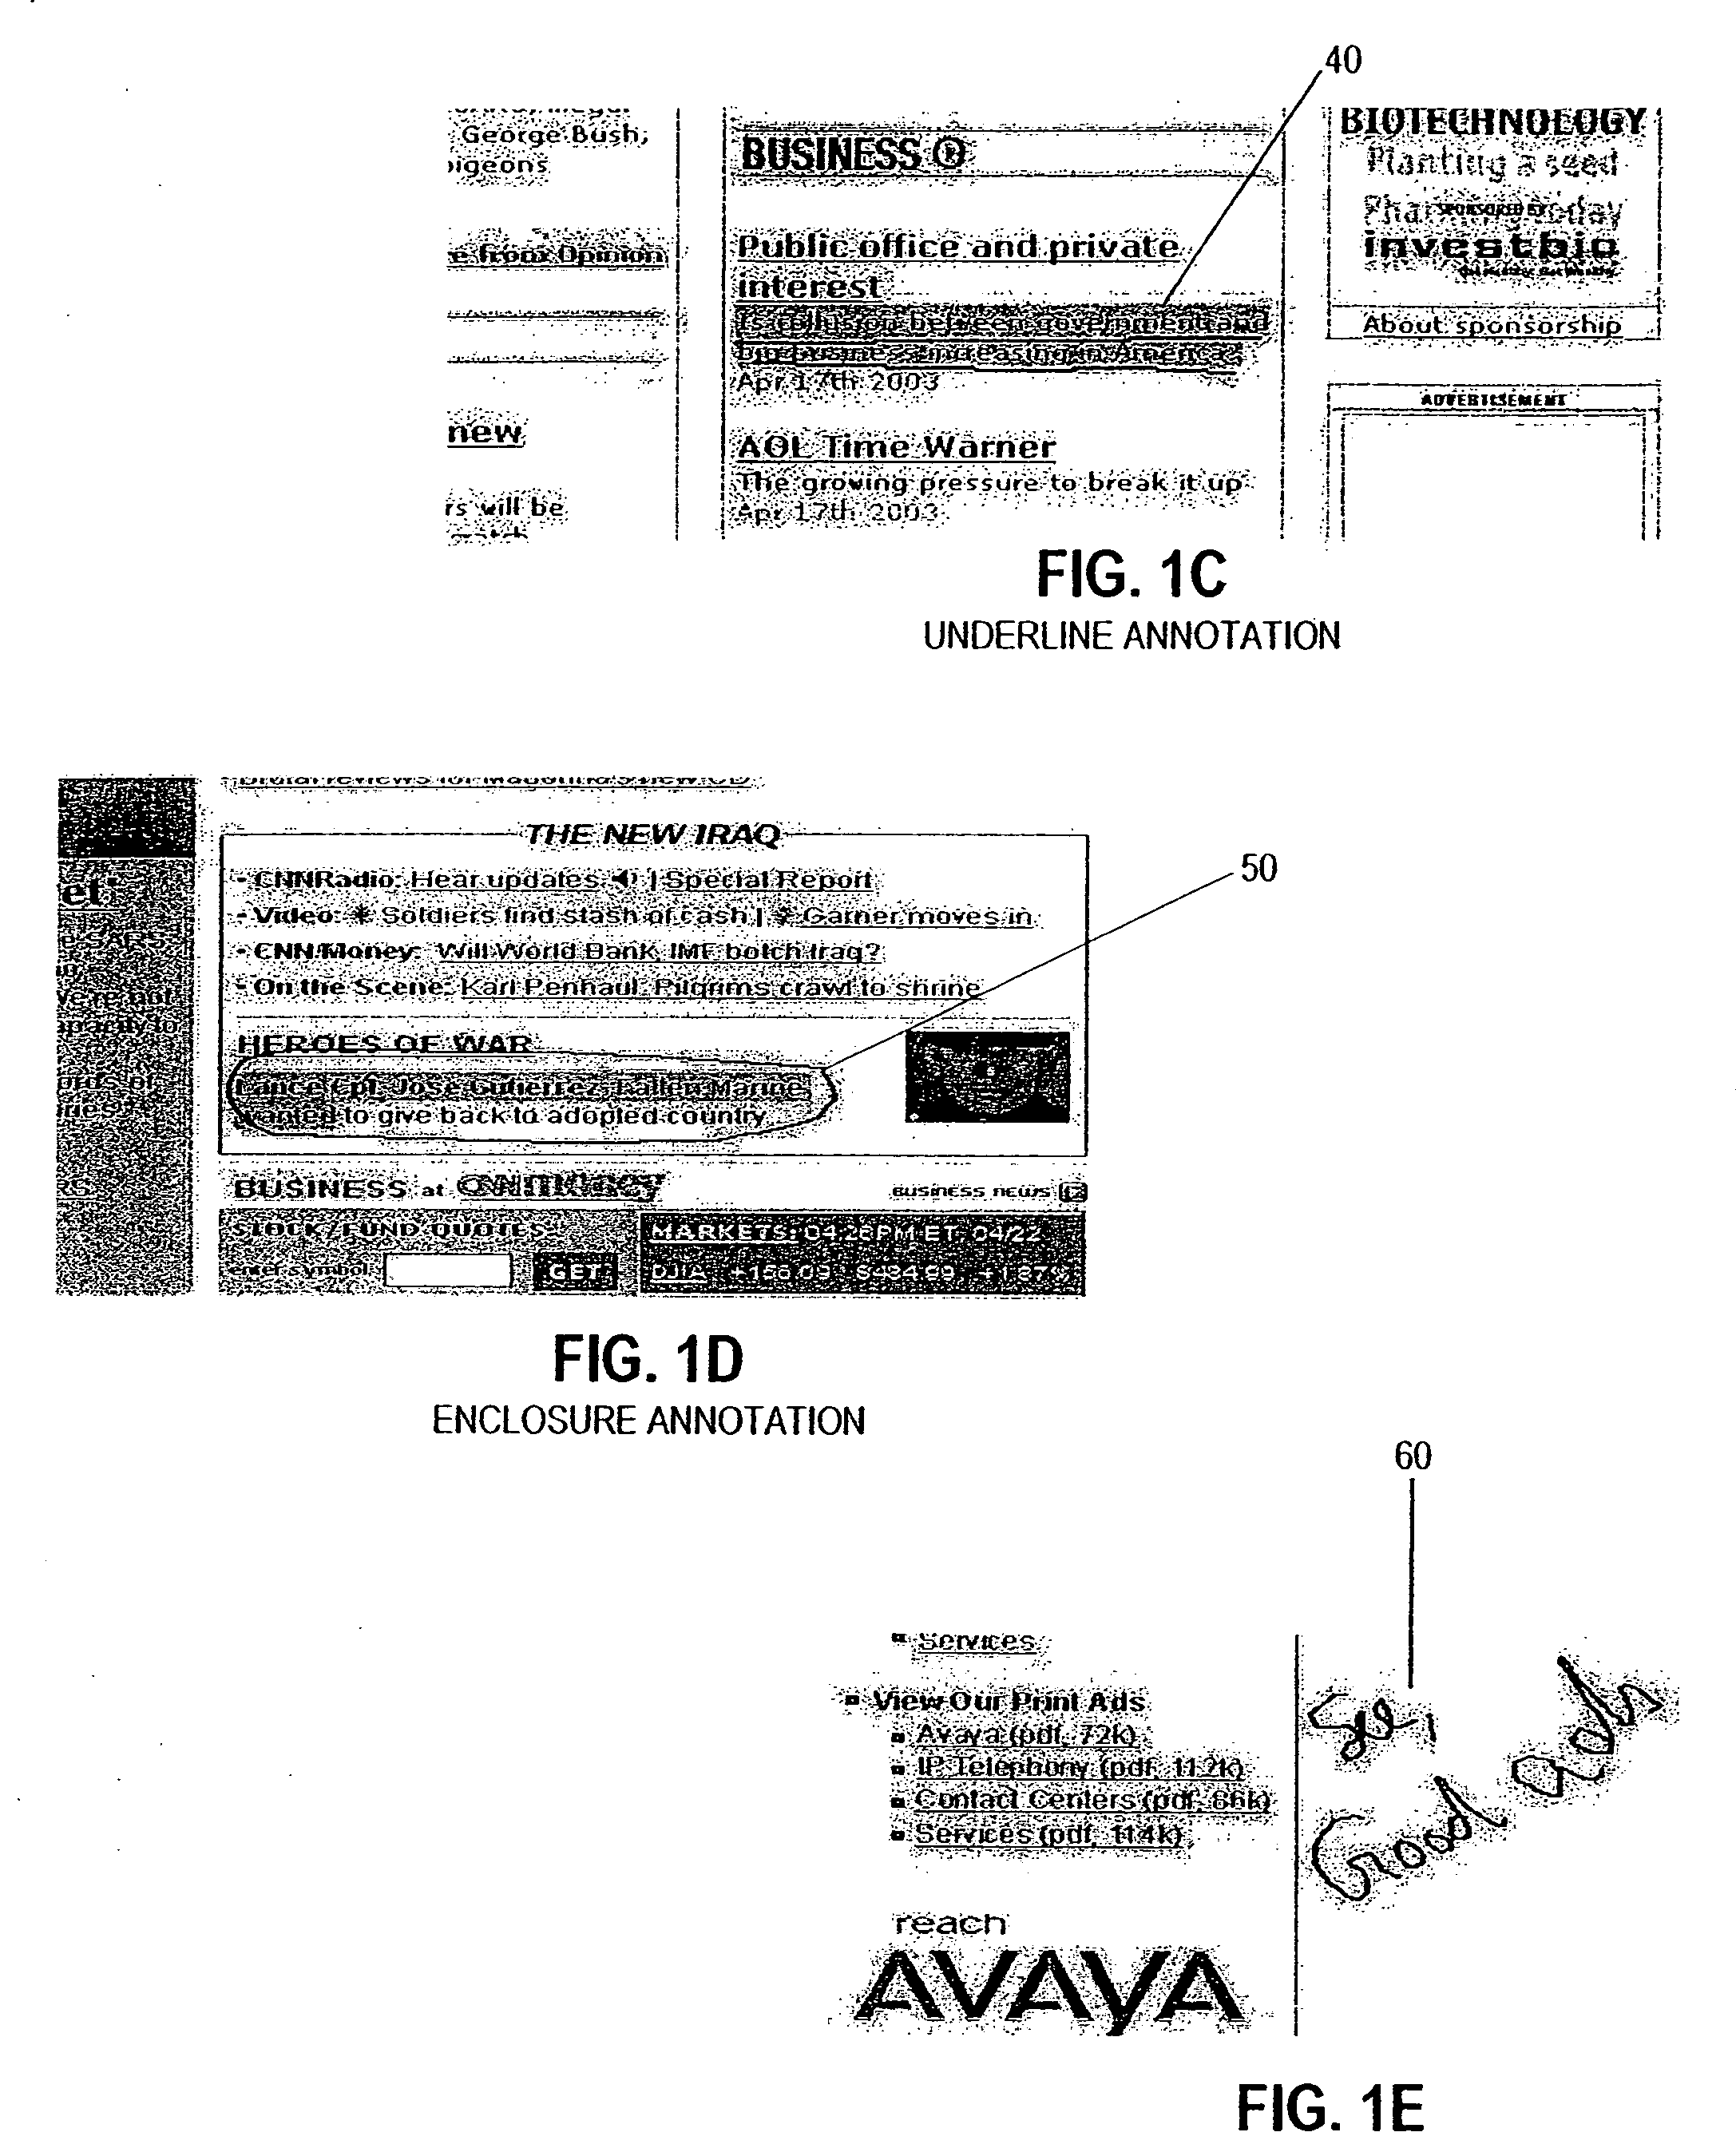 Method for storing and retrieving digital ink call logs